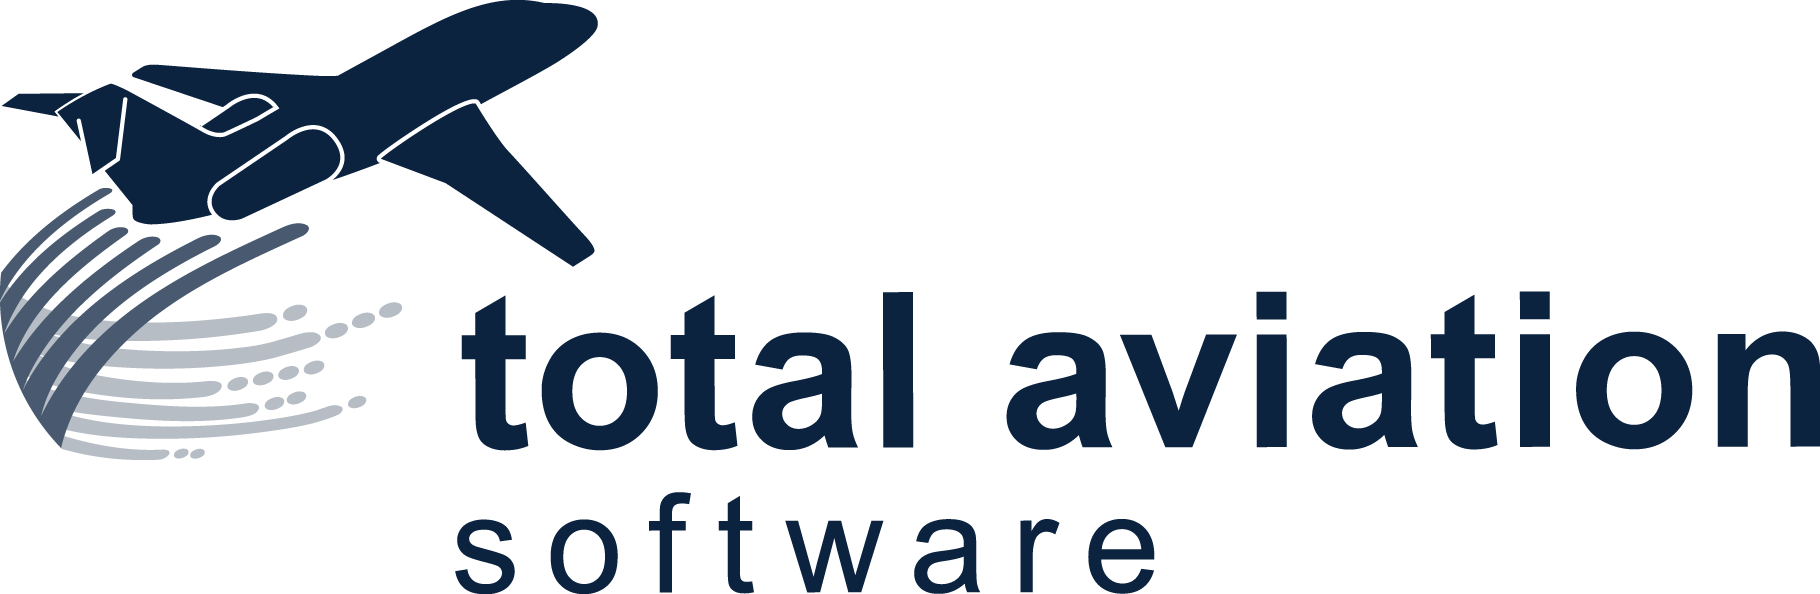 General Aviation Logo - Total Aviation Software Released by Multi Service Technology